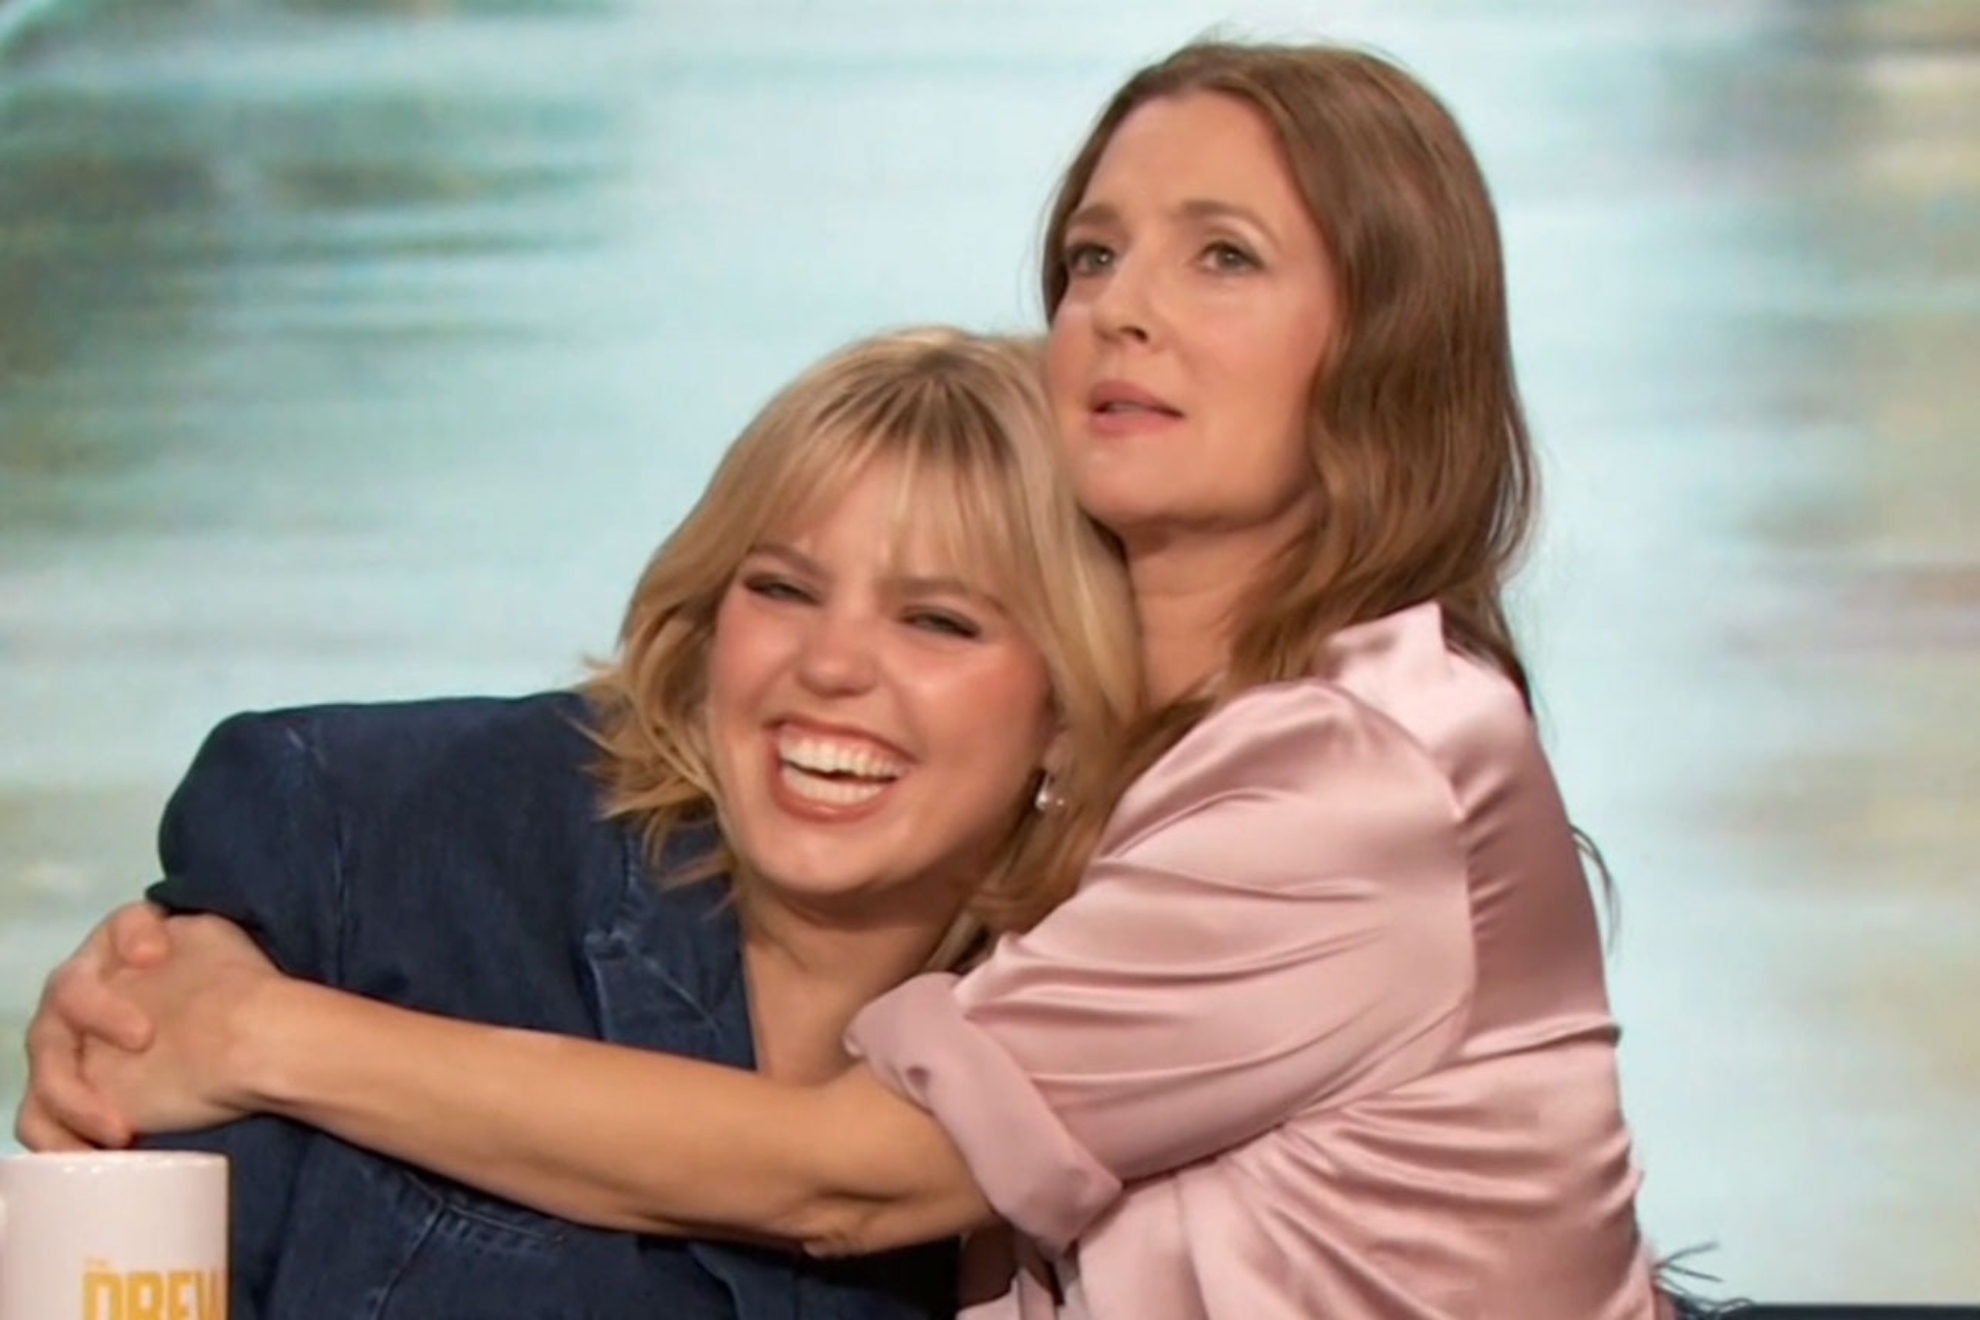 Drew Barrymore names Reneé Rapp her Kevin Costner after she protected her from a stalker during Q&A